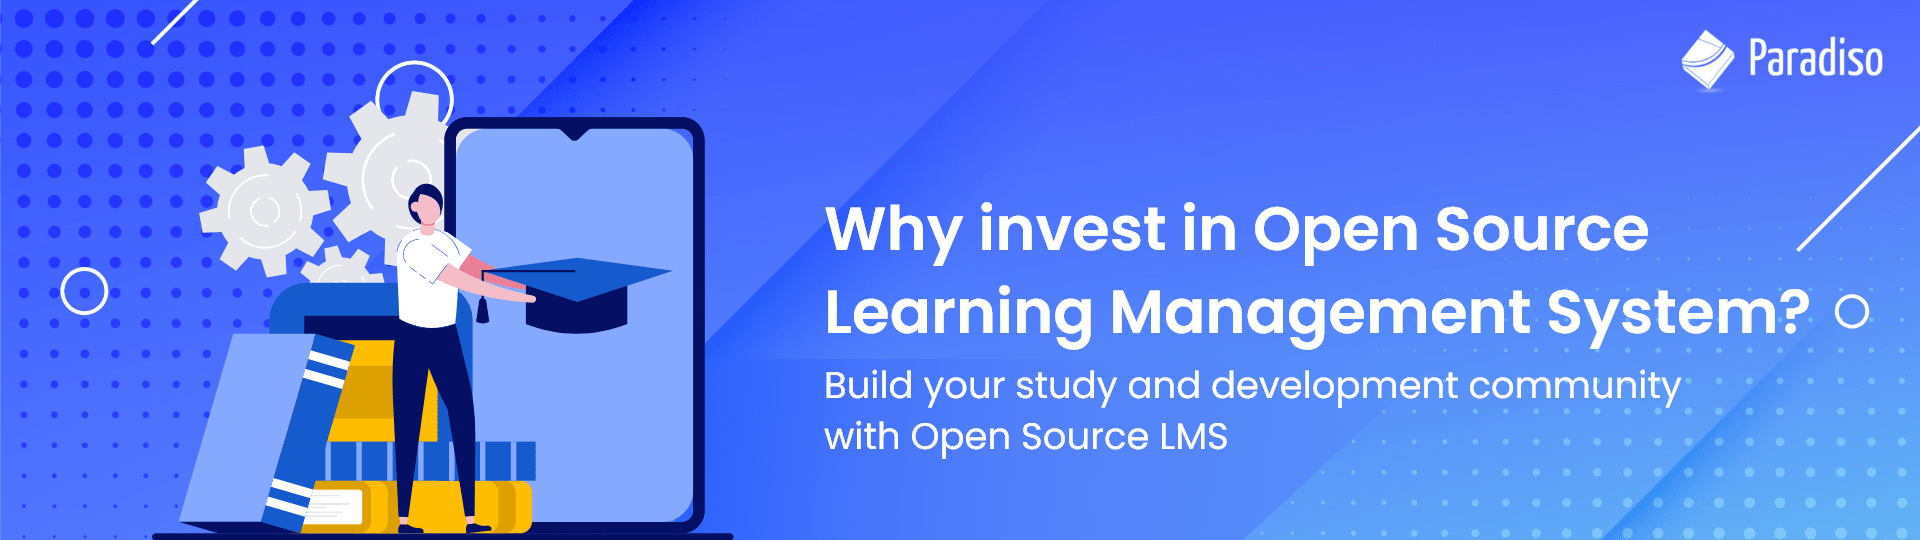 Why invest in Open Source Learning Management System?